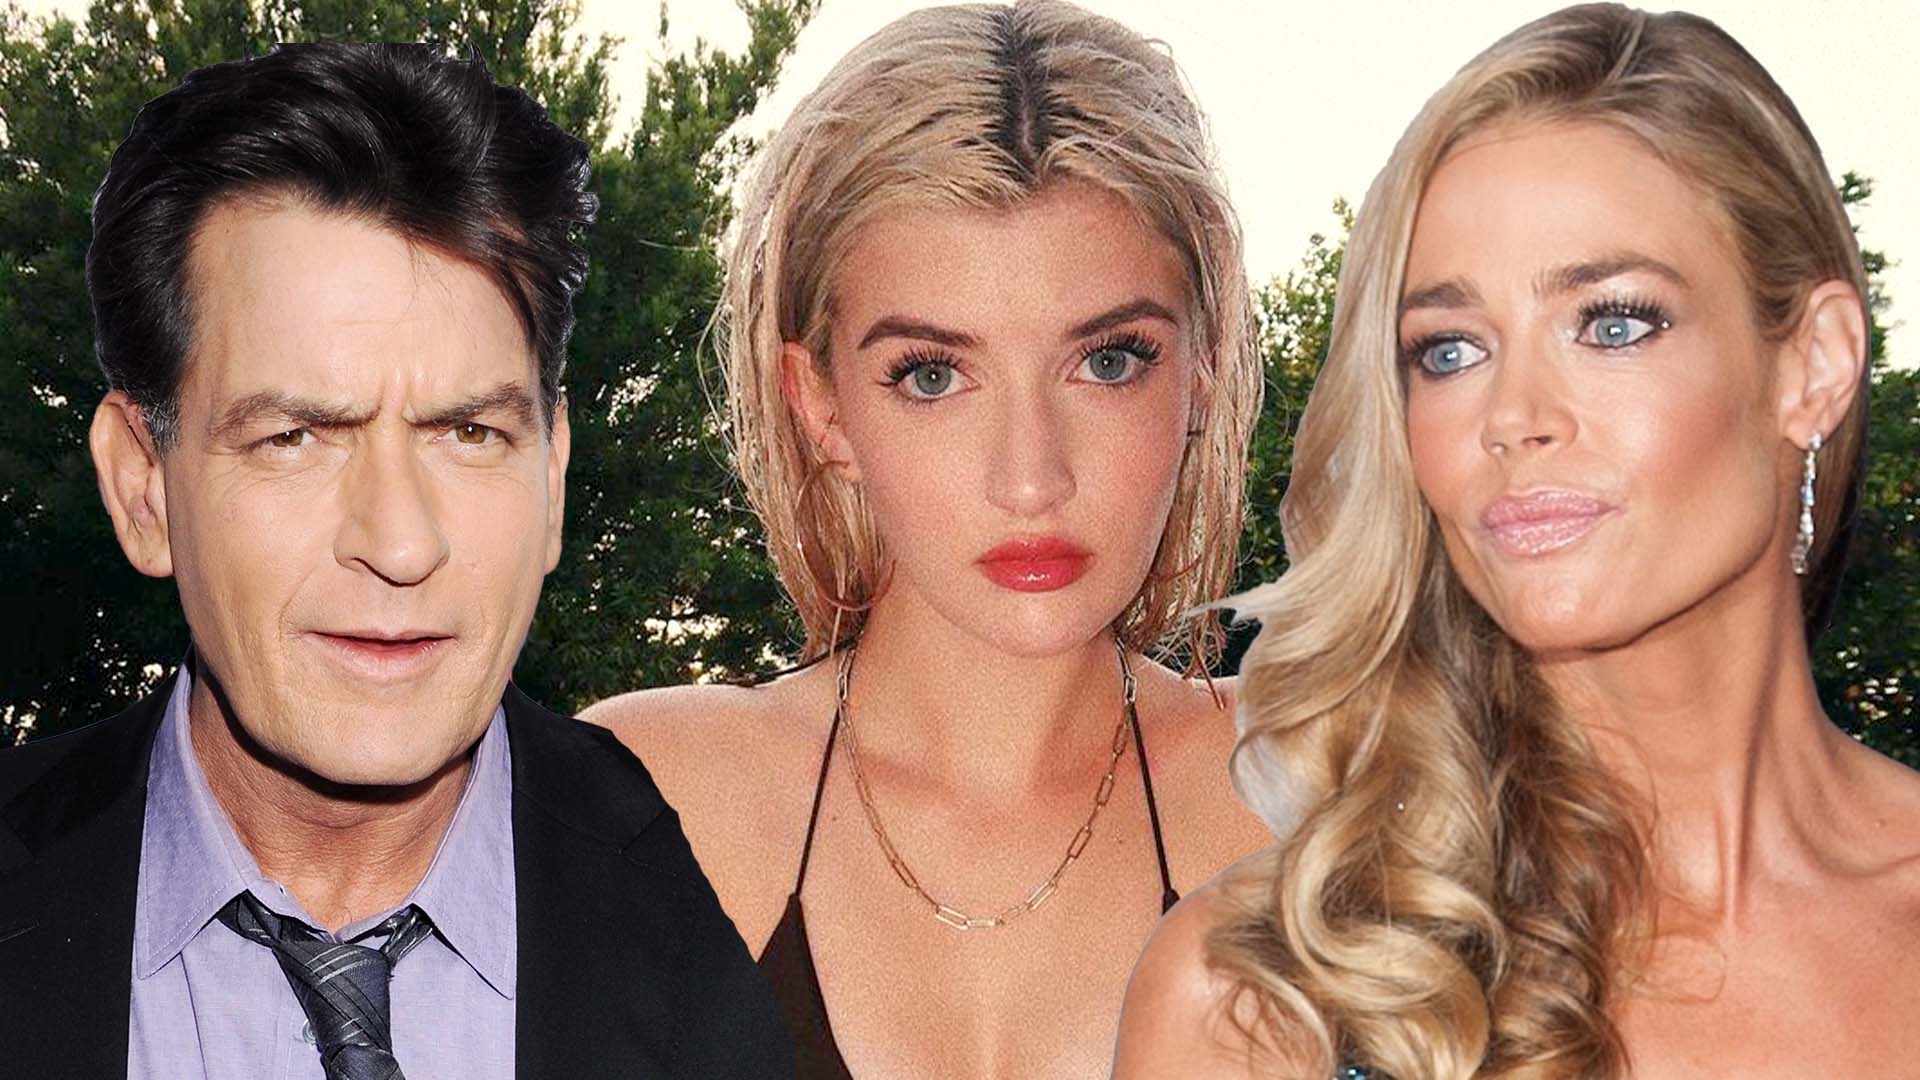 Charlie Sheen and Denise Richards Daughter Sami Shares Her Routine as a Sex Worker Entertainment Tonight photo